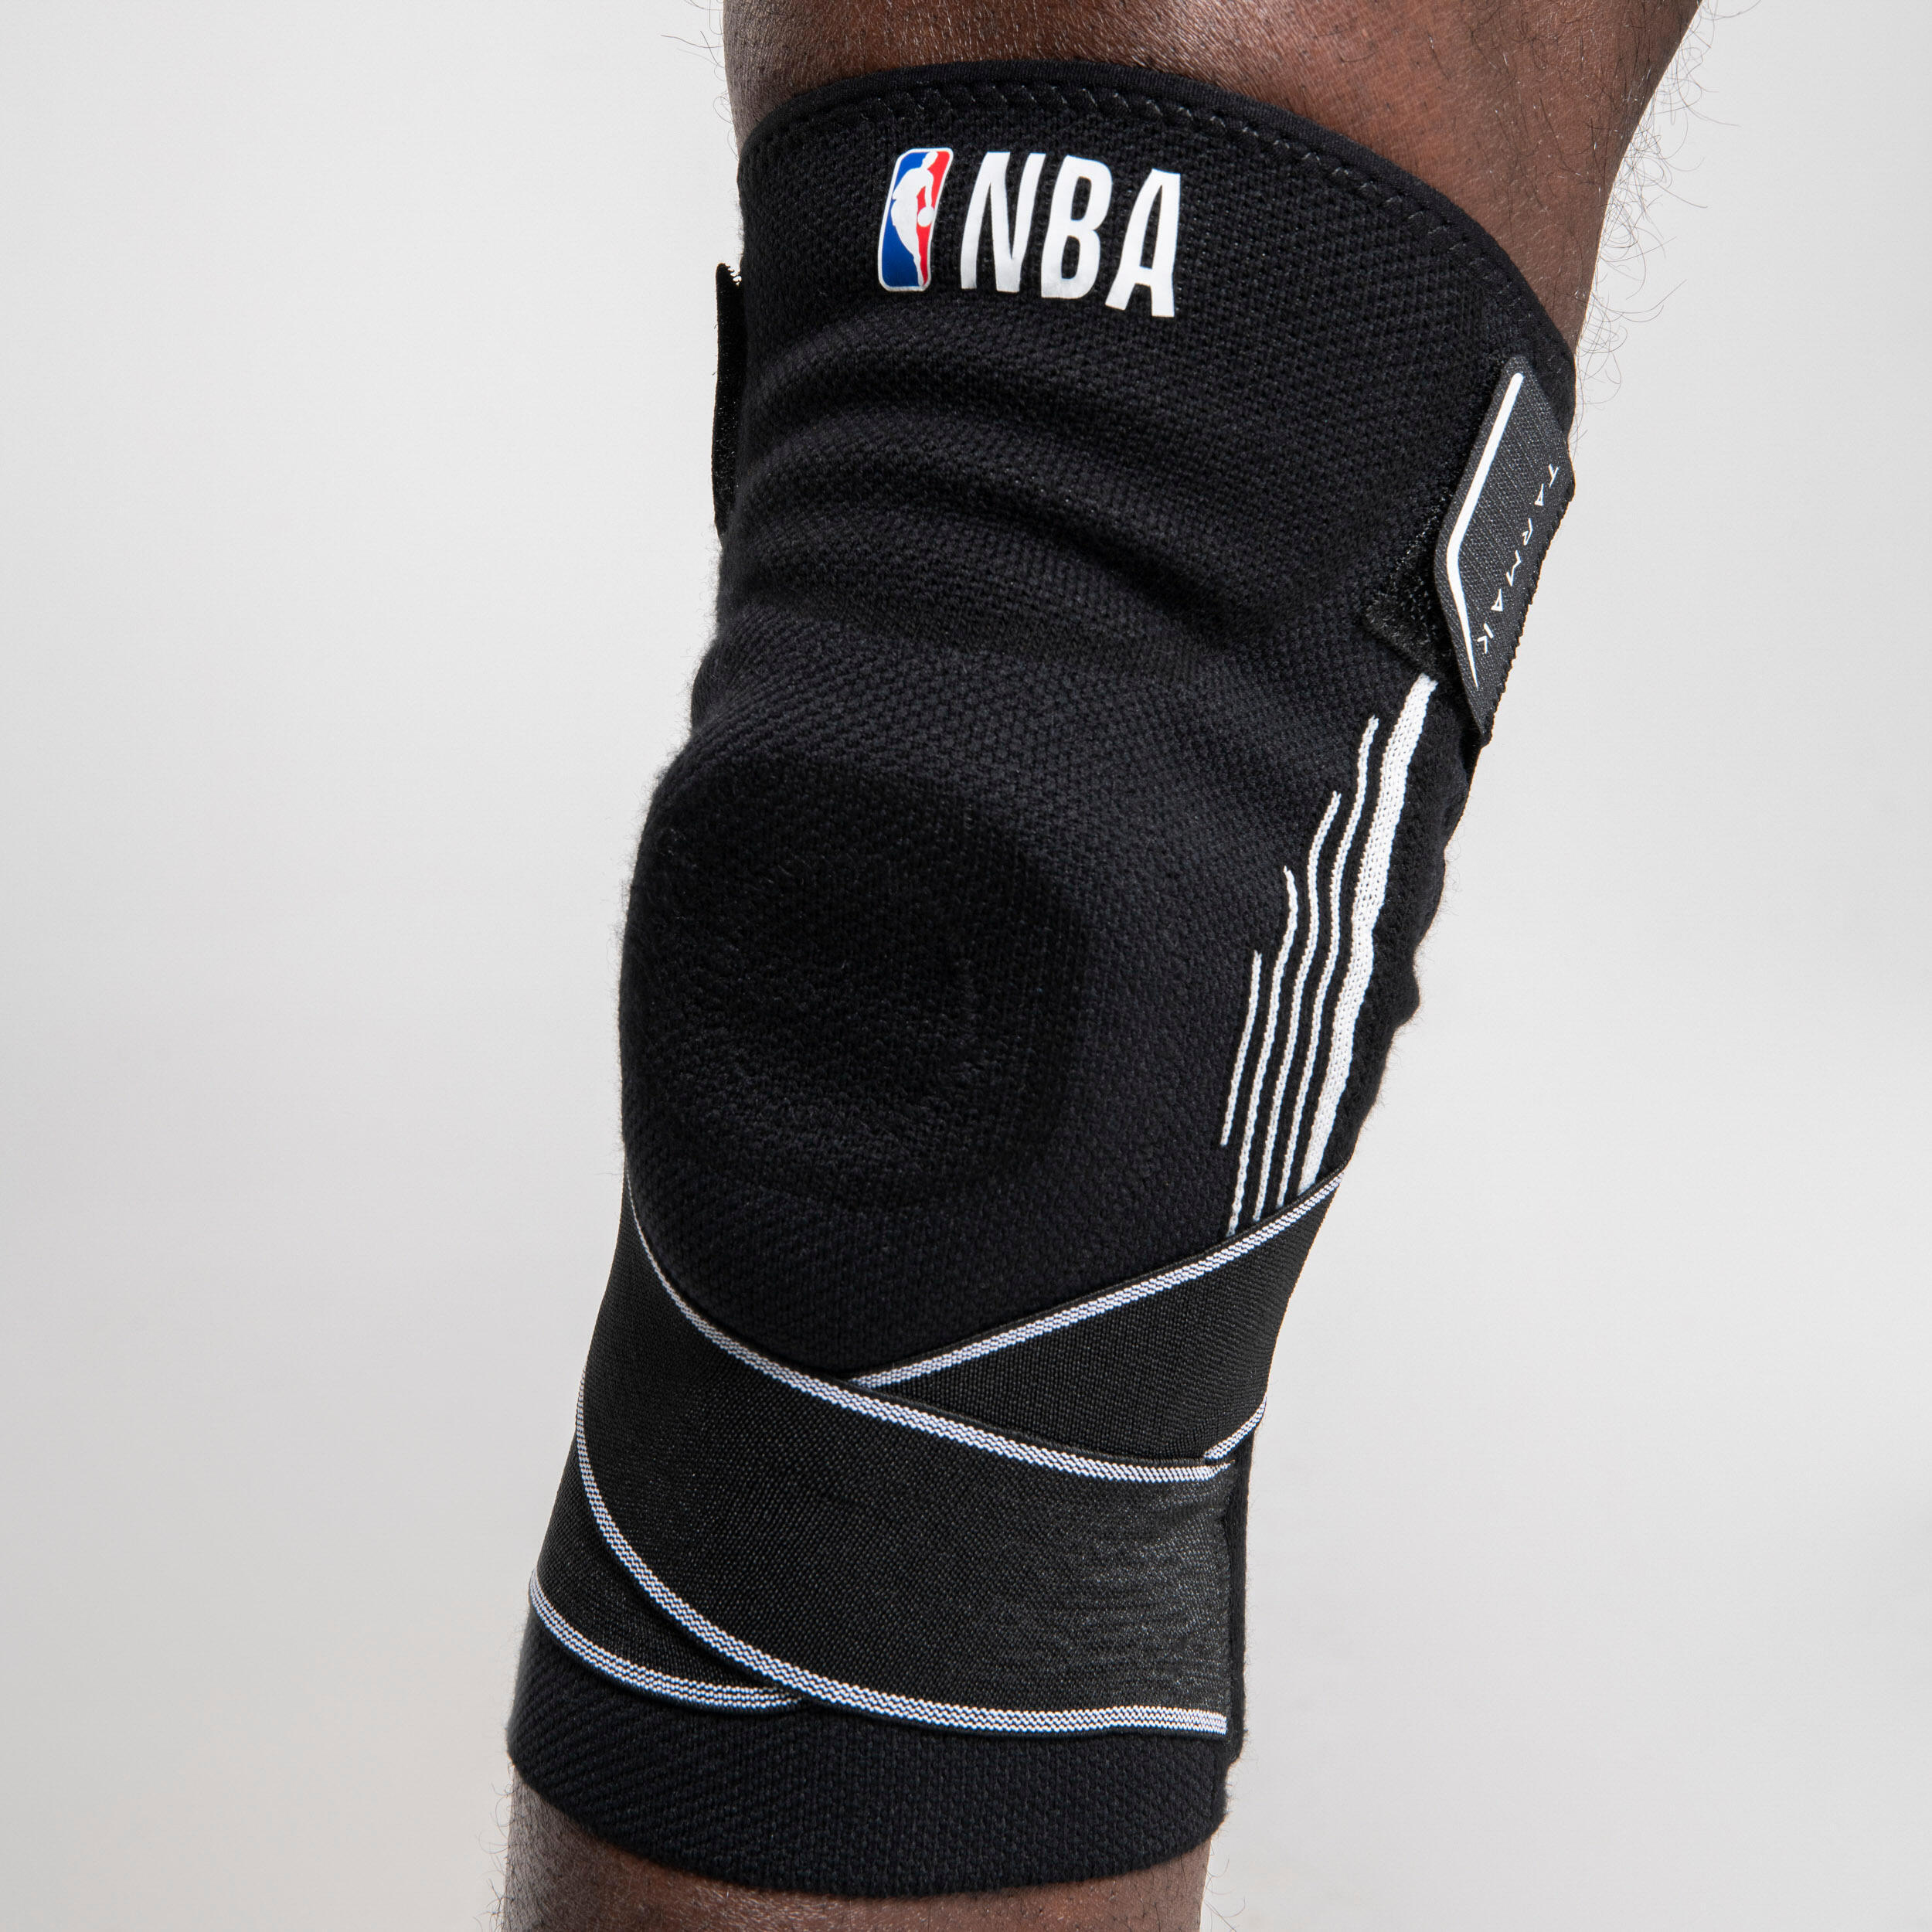 Adult Right/Left Knee Support Mid 500 NBA - Black 4/13